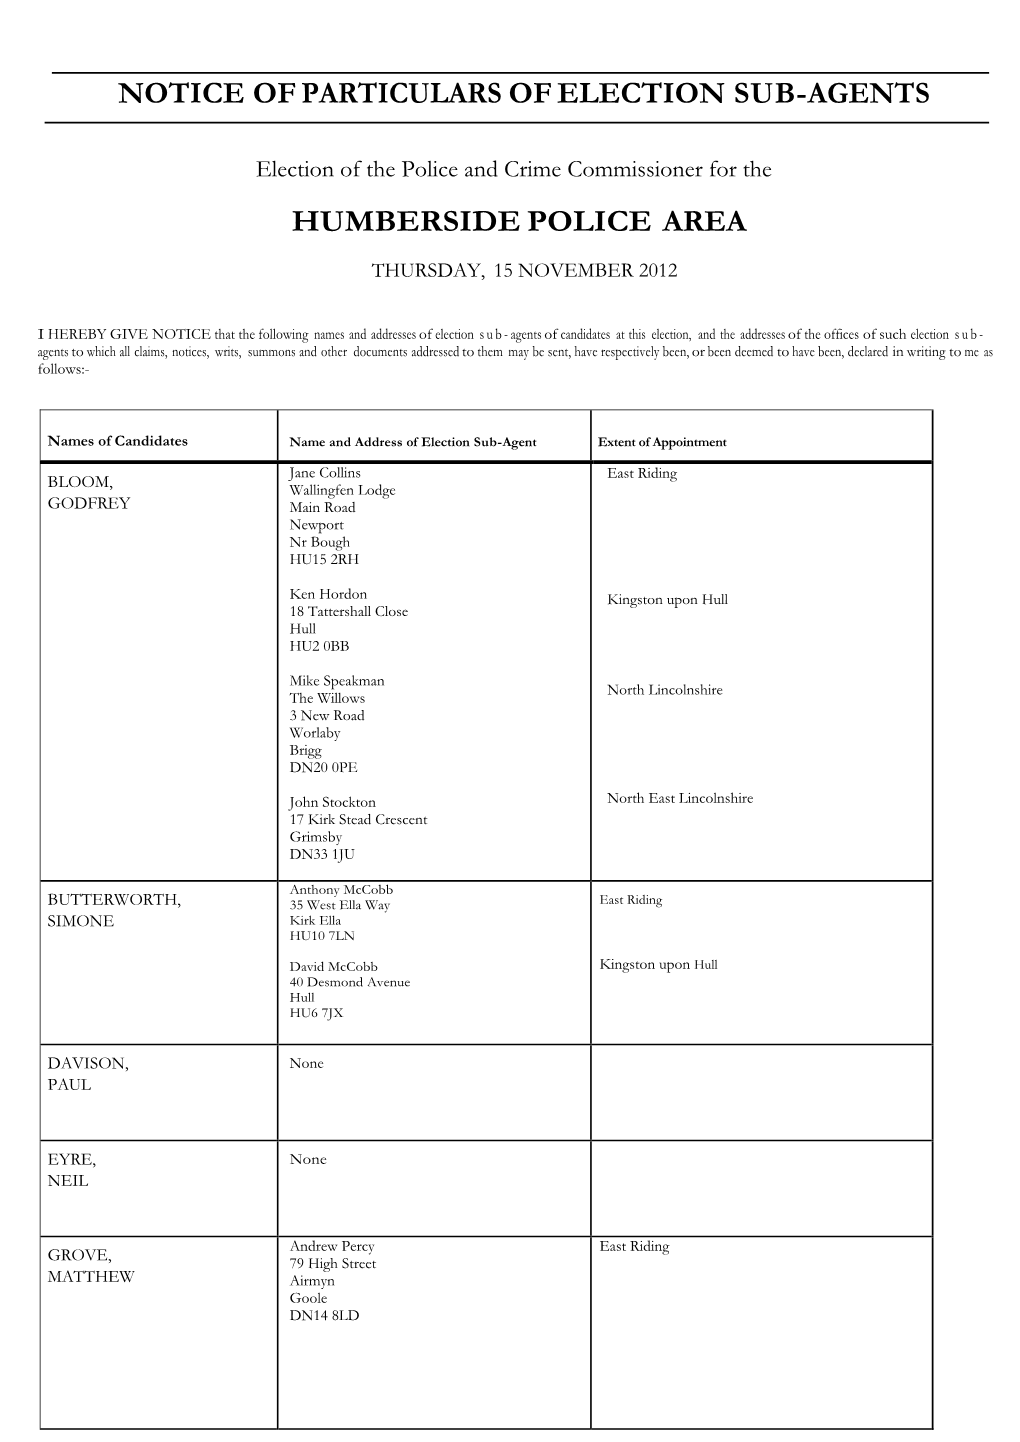 Notice of Particulars of Election Sub-Agents Humberside Police Area